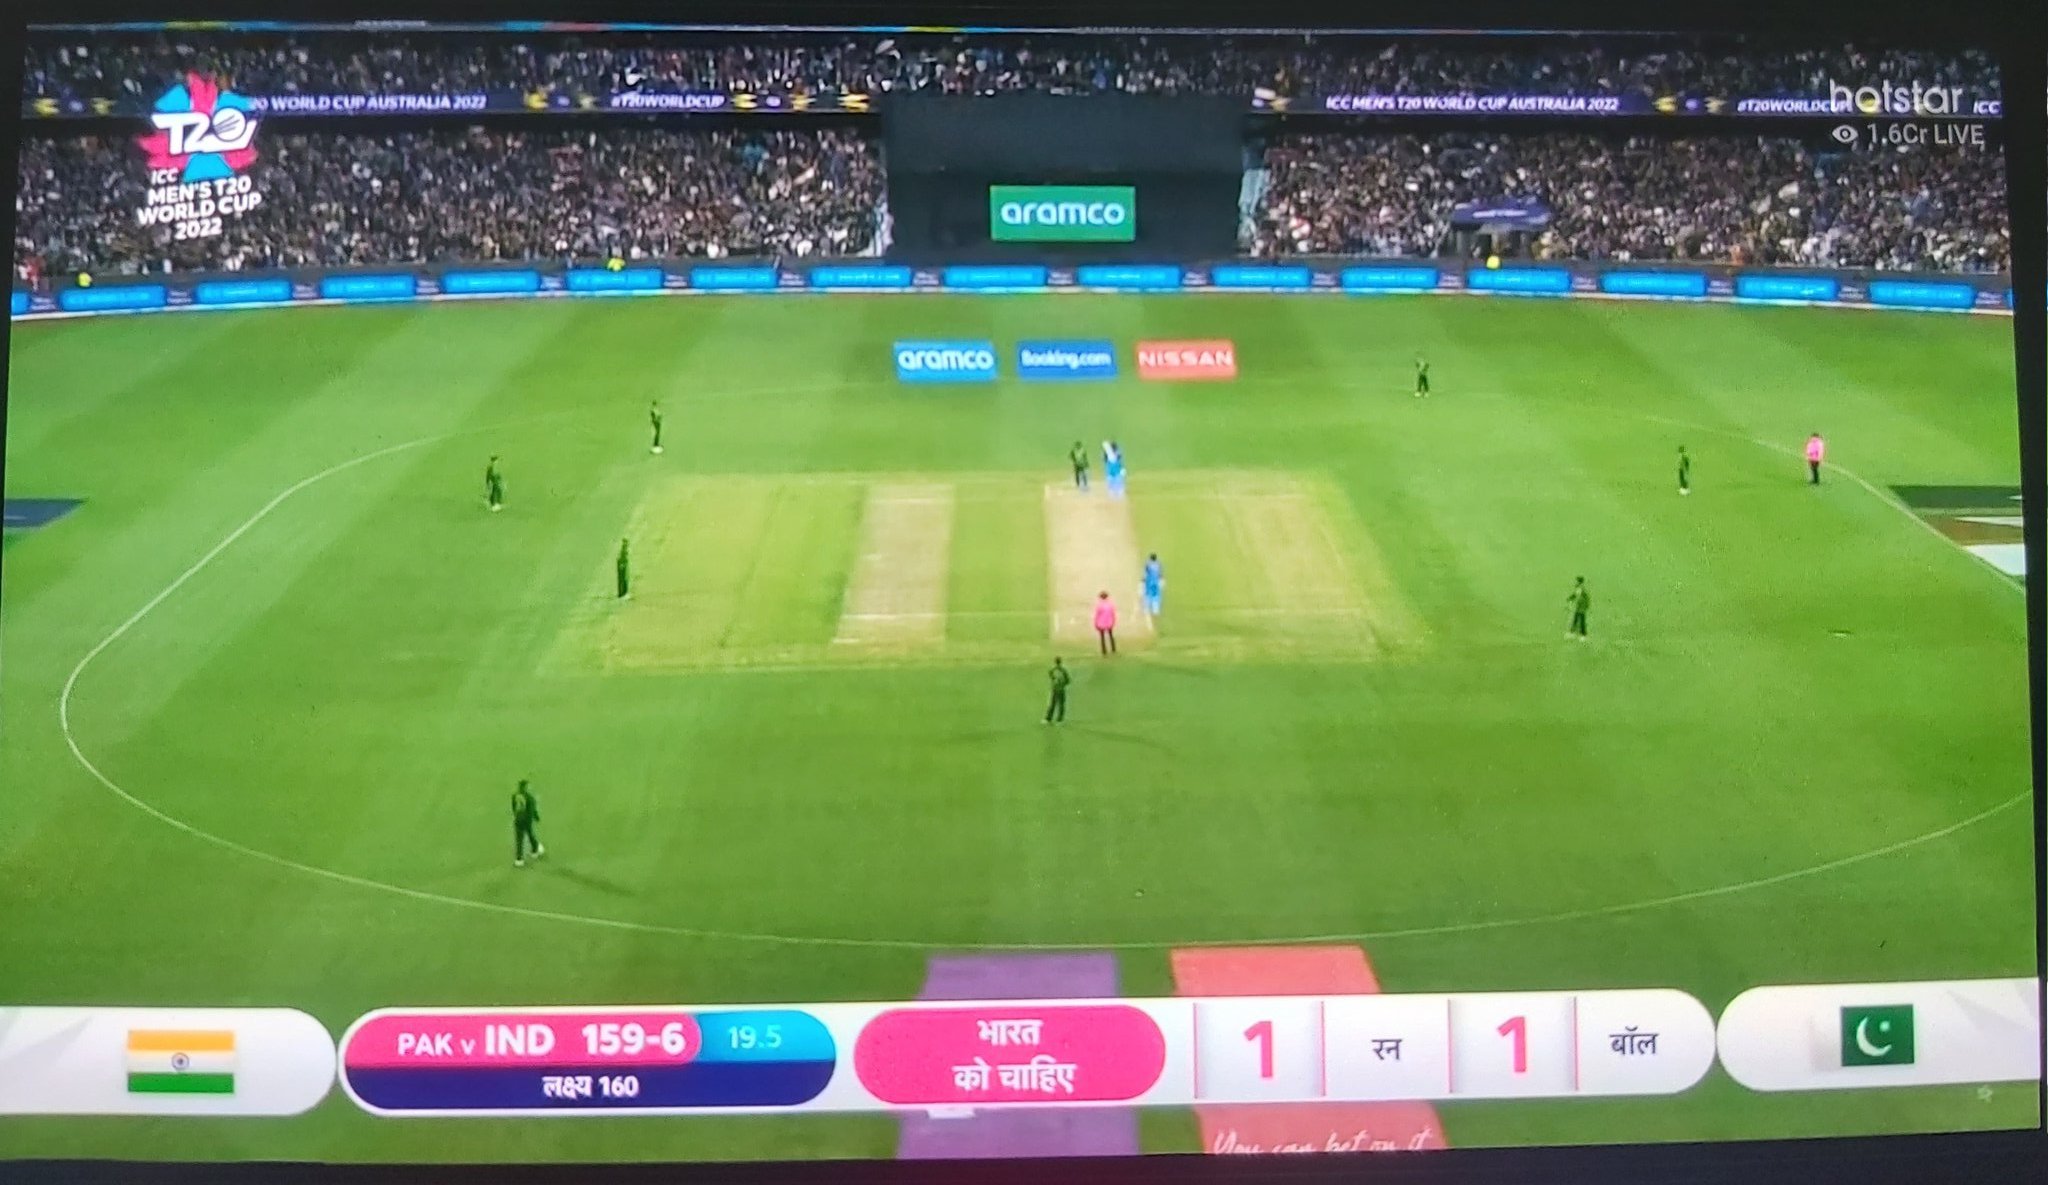 ICC T20 World Cup 2022: Virat Kohli masterclass brings Diwali Shopping to standstill with fans glued to their TVs, UPI Transactions IND-PAK, India vs Pakistan